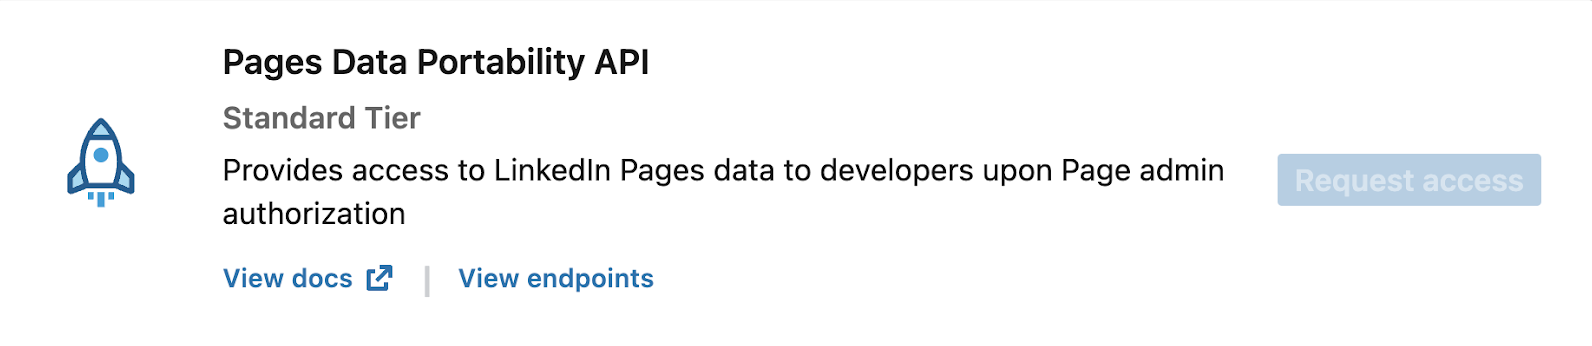 Pages Data Portability API Product